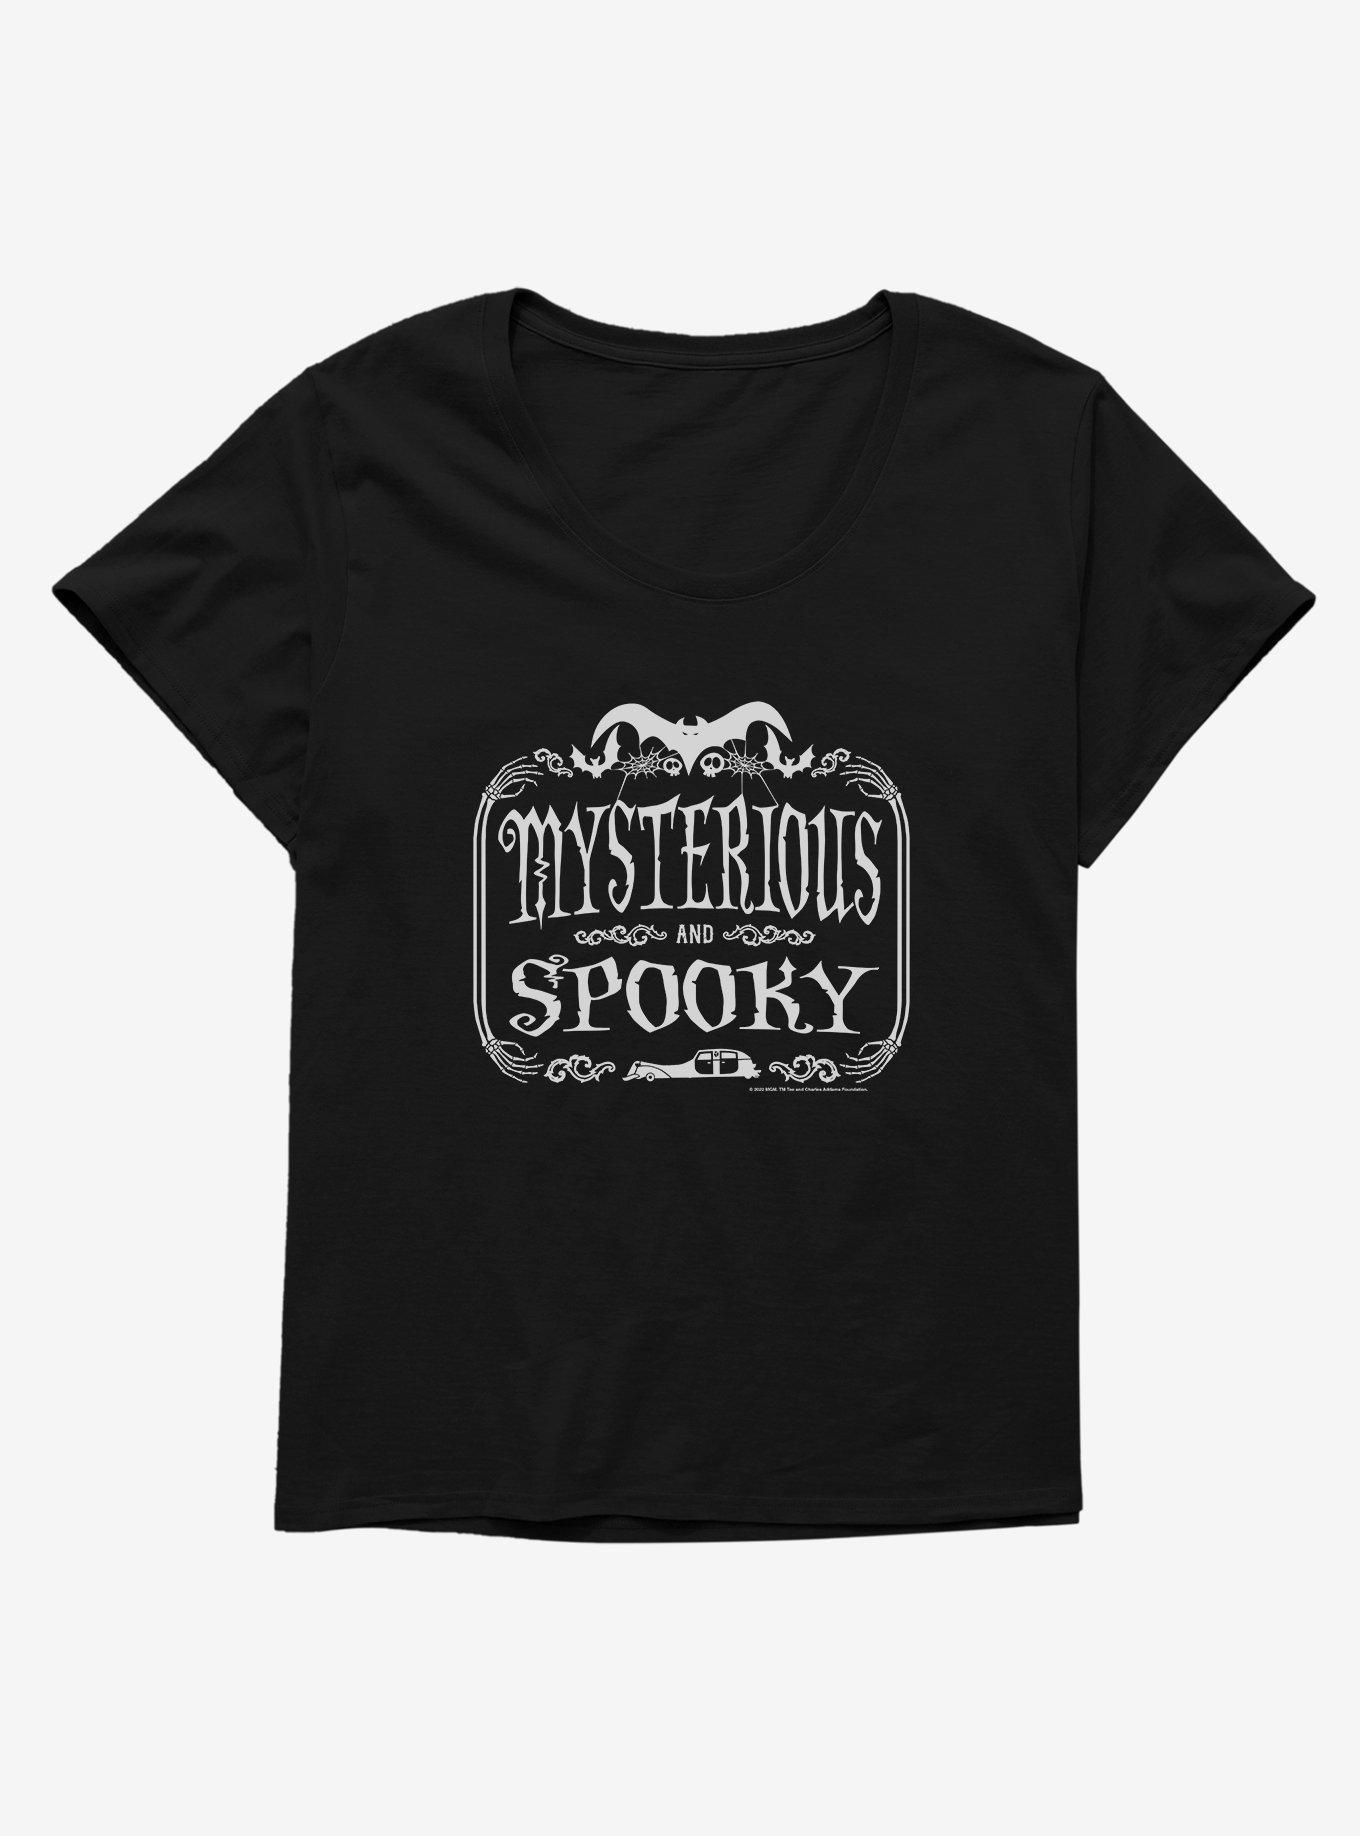 Addams Family Mysterious And Spooky Girls T-Shirt Plus Size, BLACK, hi-res